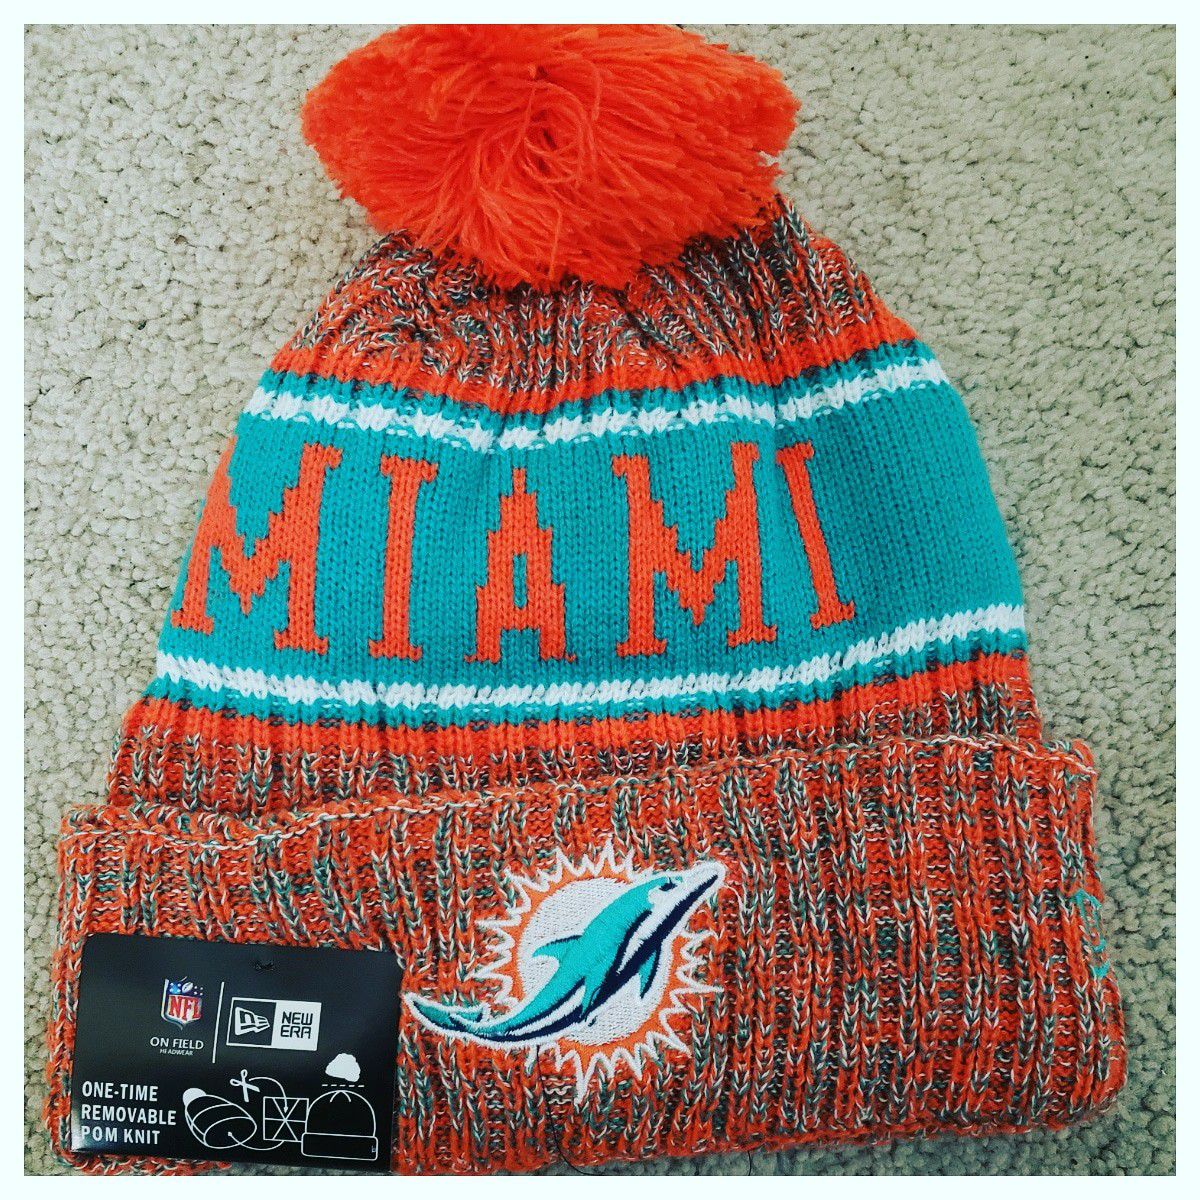 AUTHENTIC NFL FOOTBALL WINTER BEANIE HAT.